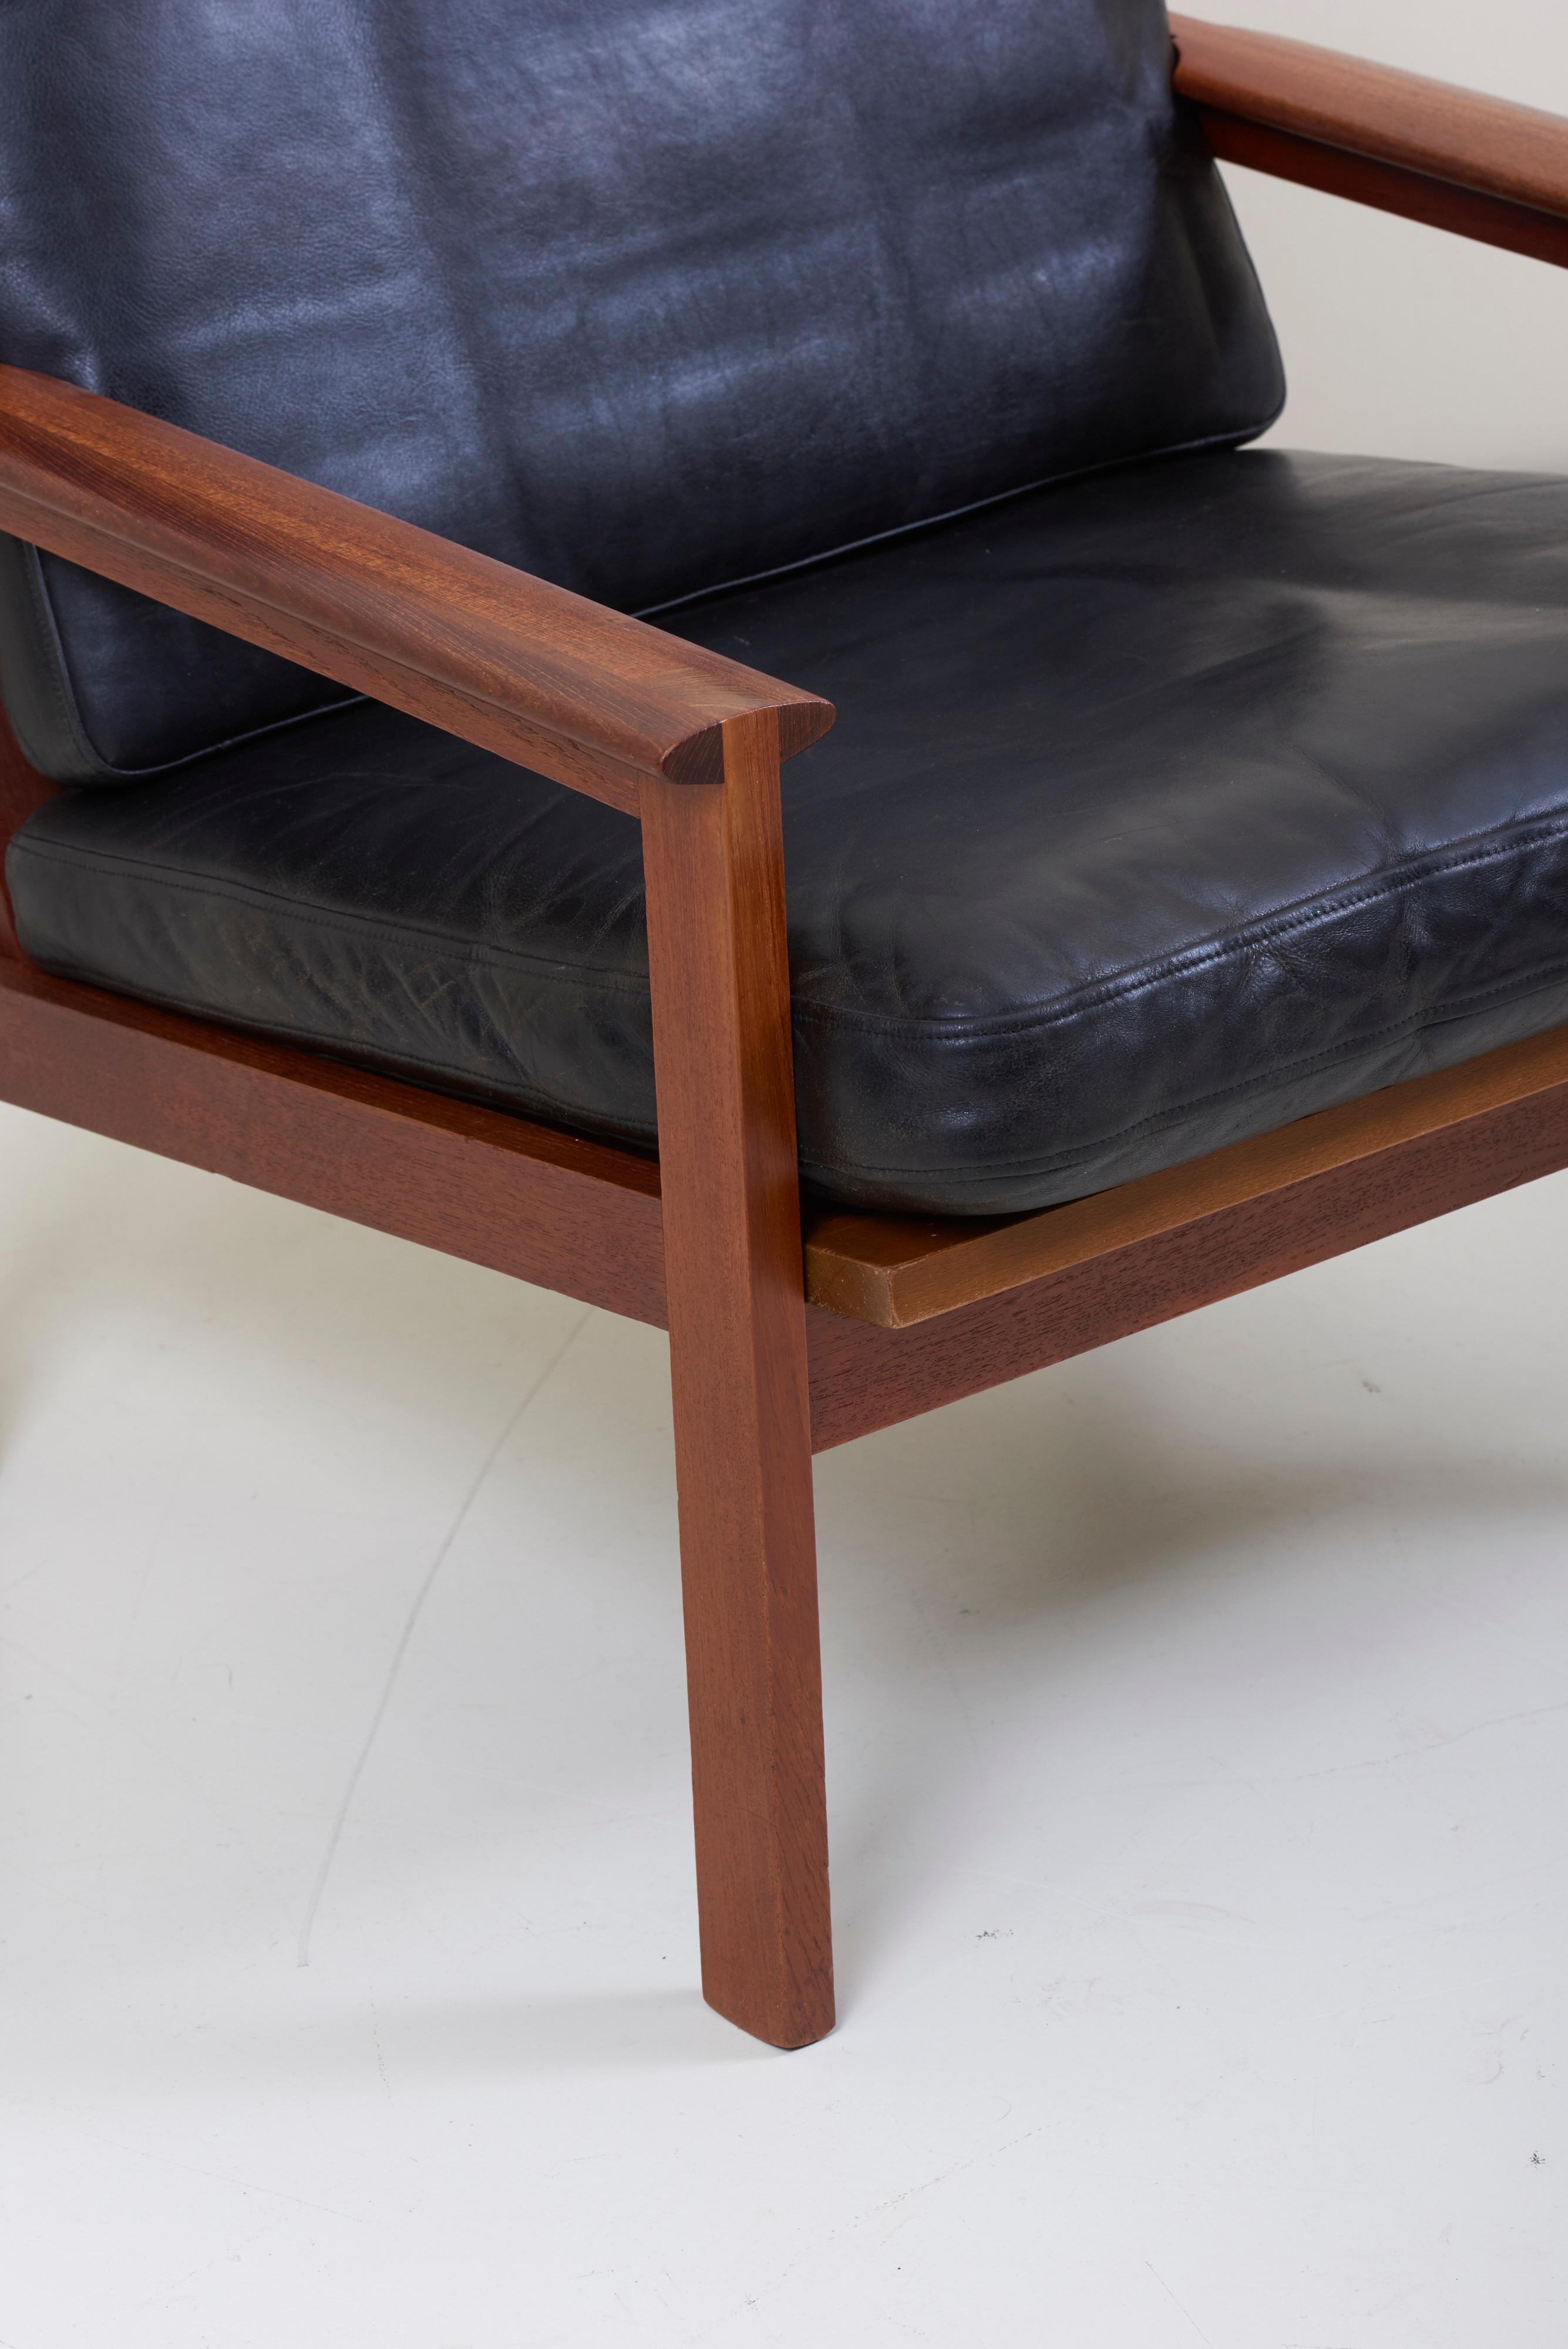 Pair of Lounge Chairs in Teak and Leather by Danish Architect Illum Wikkelsø 3